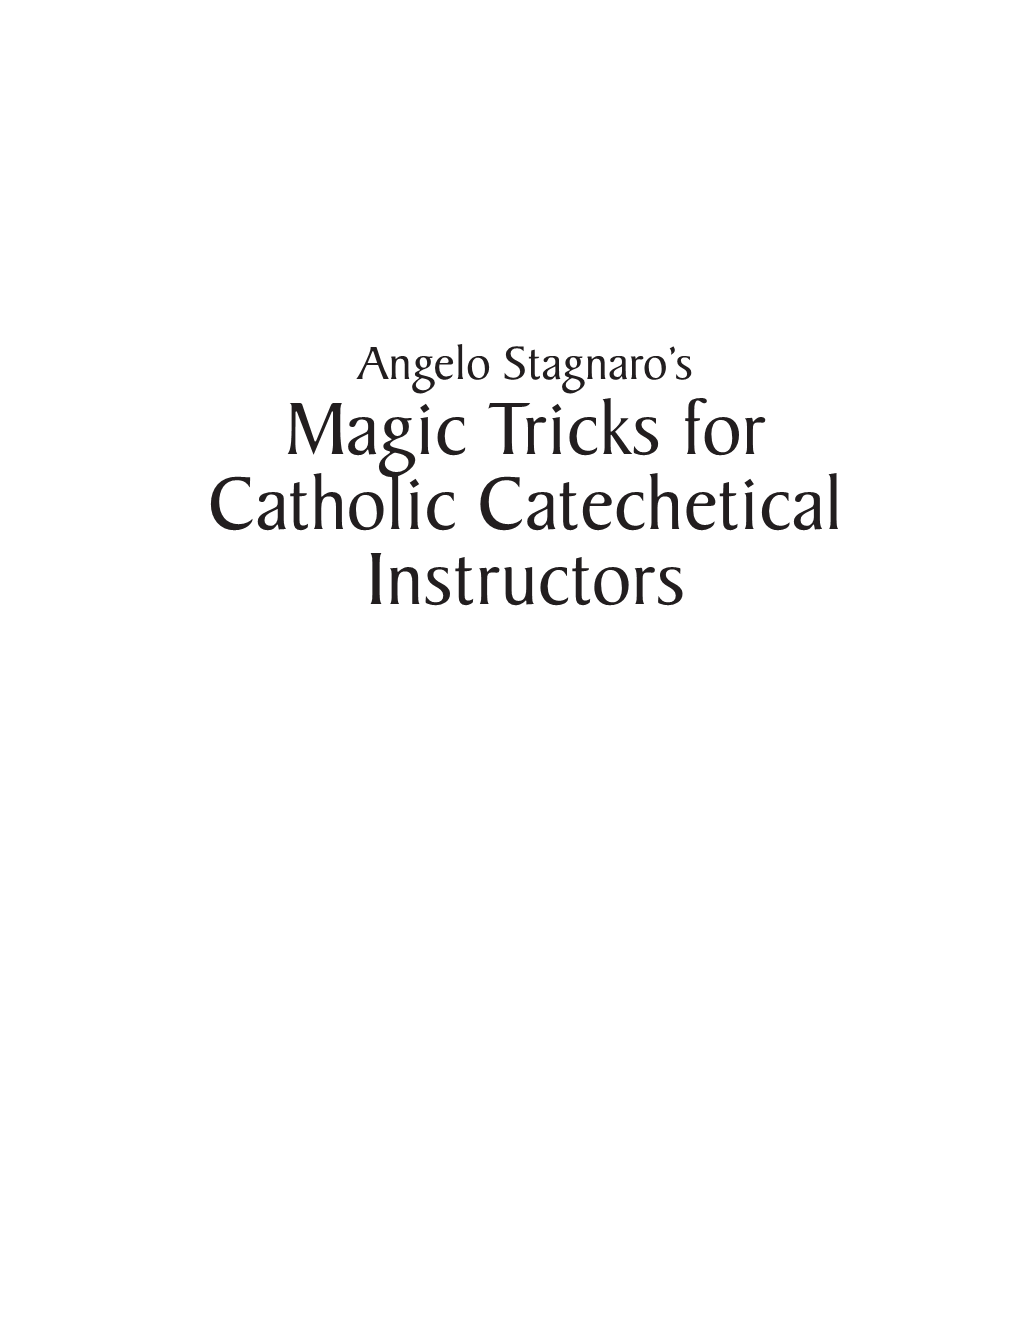 Catechism Magic, Numerous Articles in Catholic and Secular Journals, and the Soon-To-Be-Released “Psi-Wars” Strategy Game